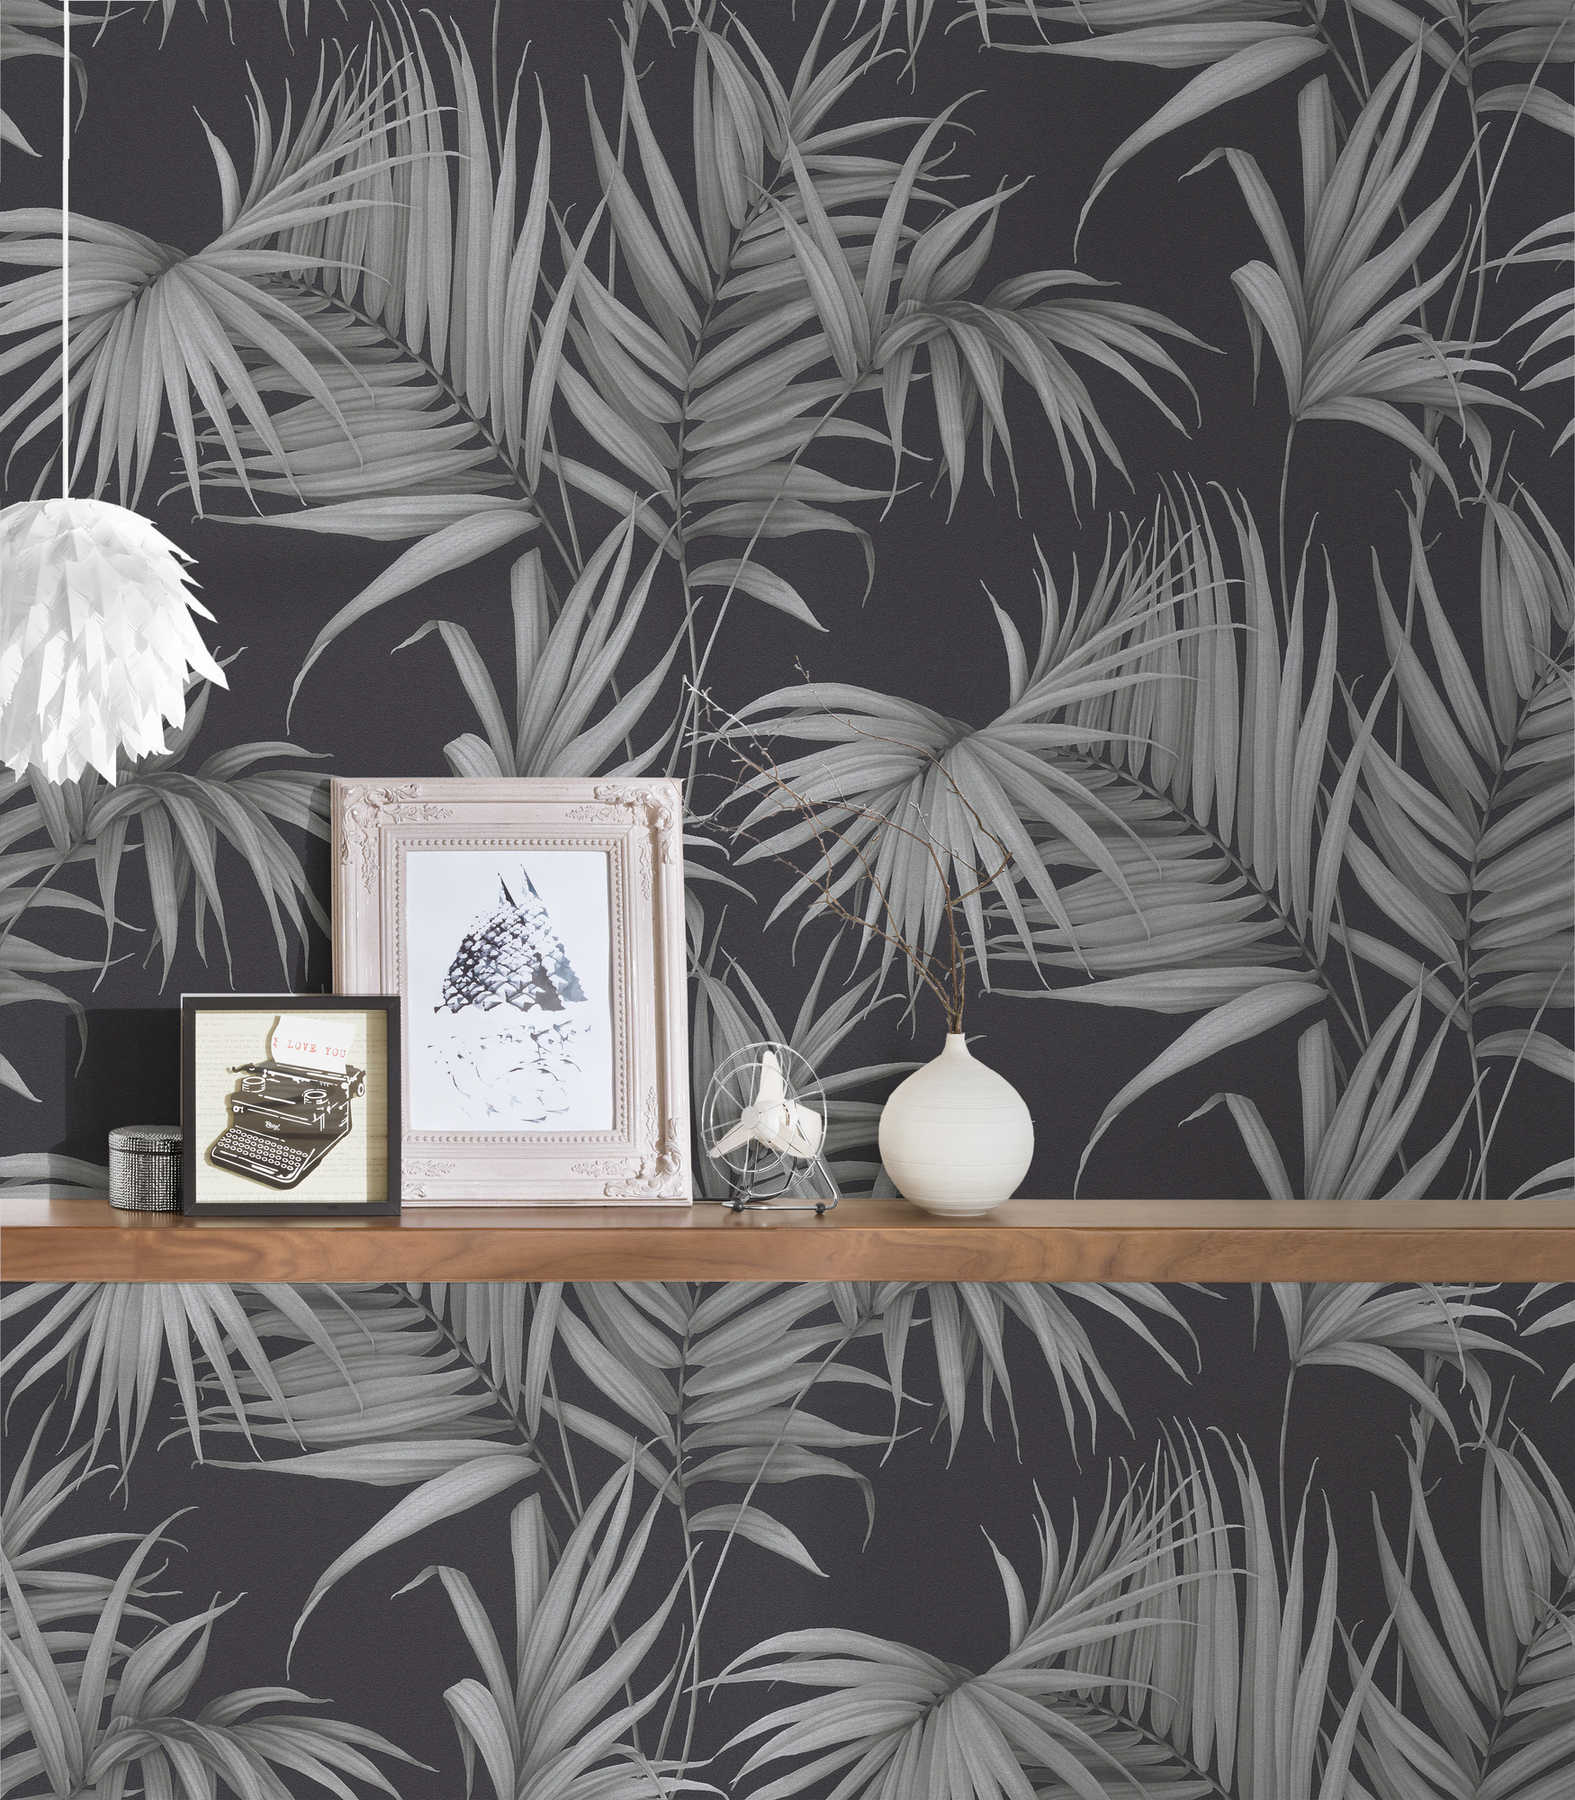             Tropical wallpaper with fern leaves - grey, black
        